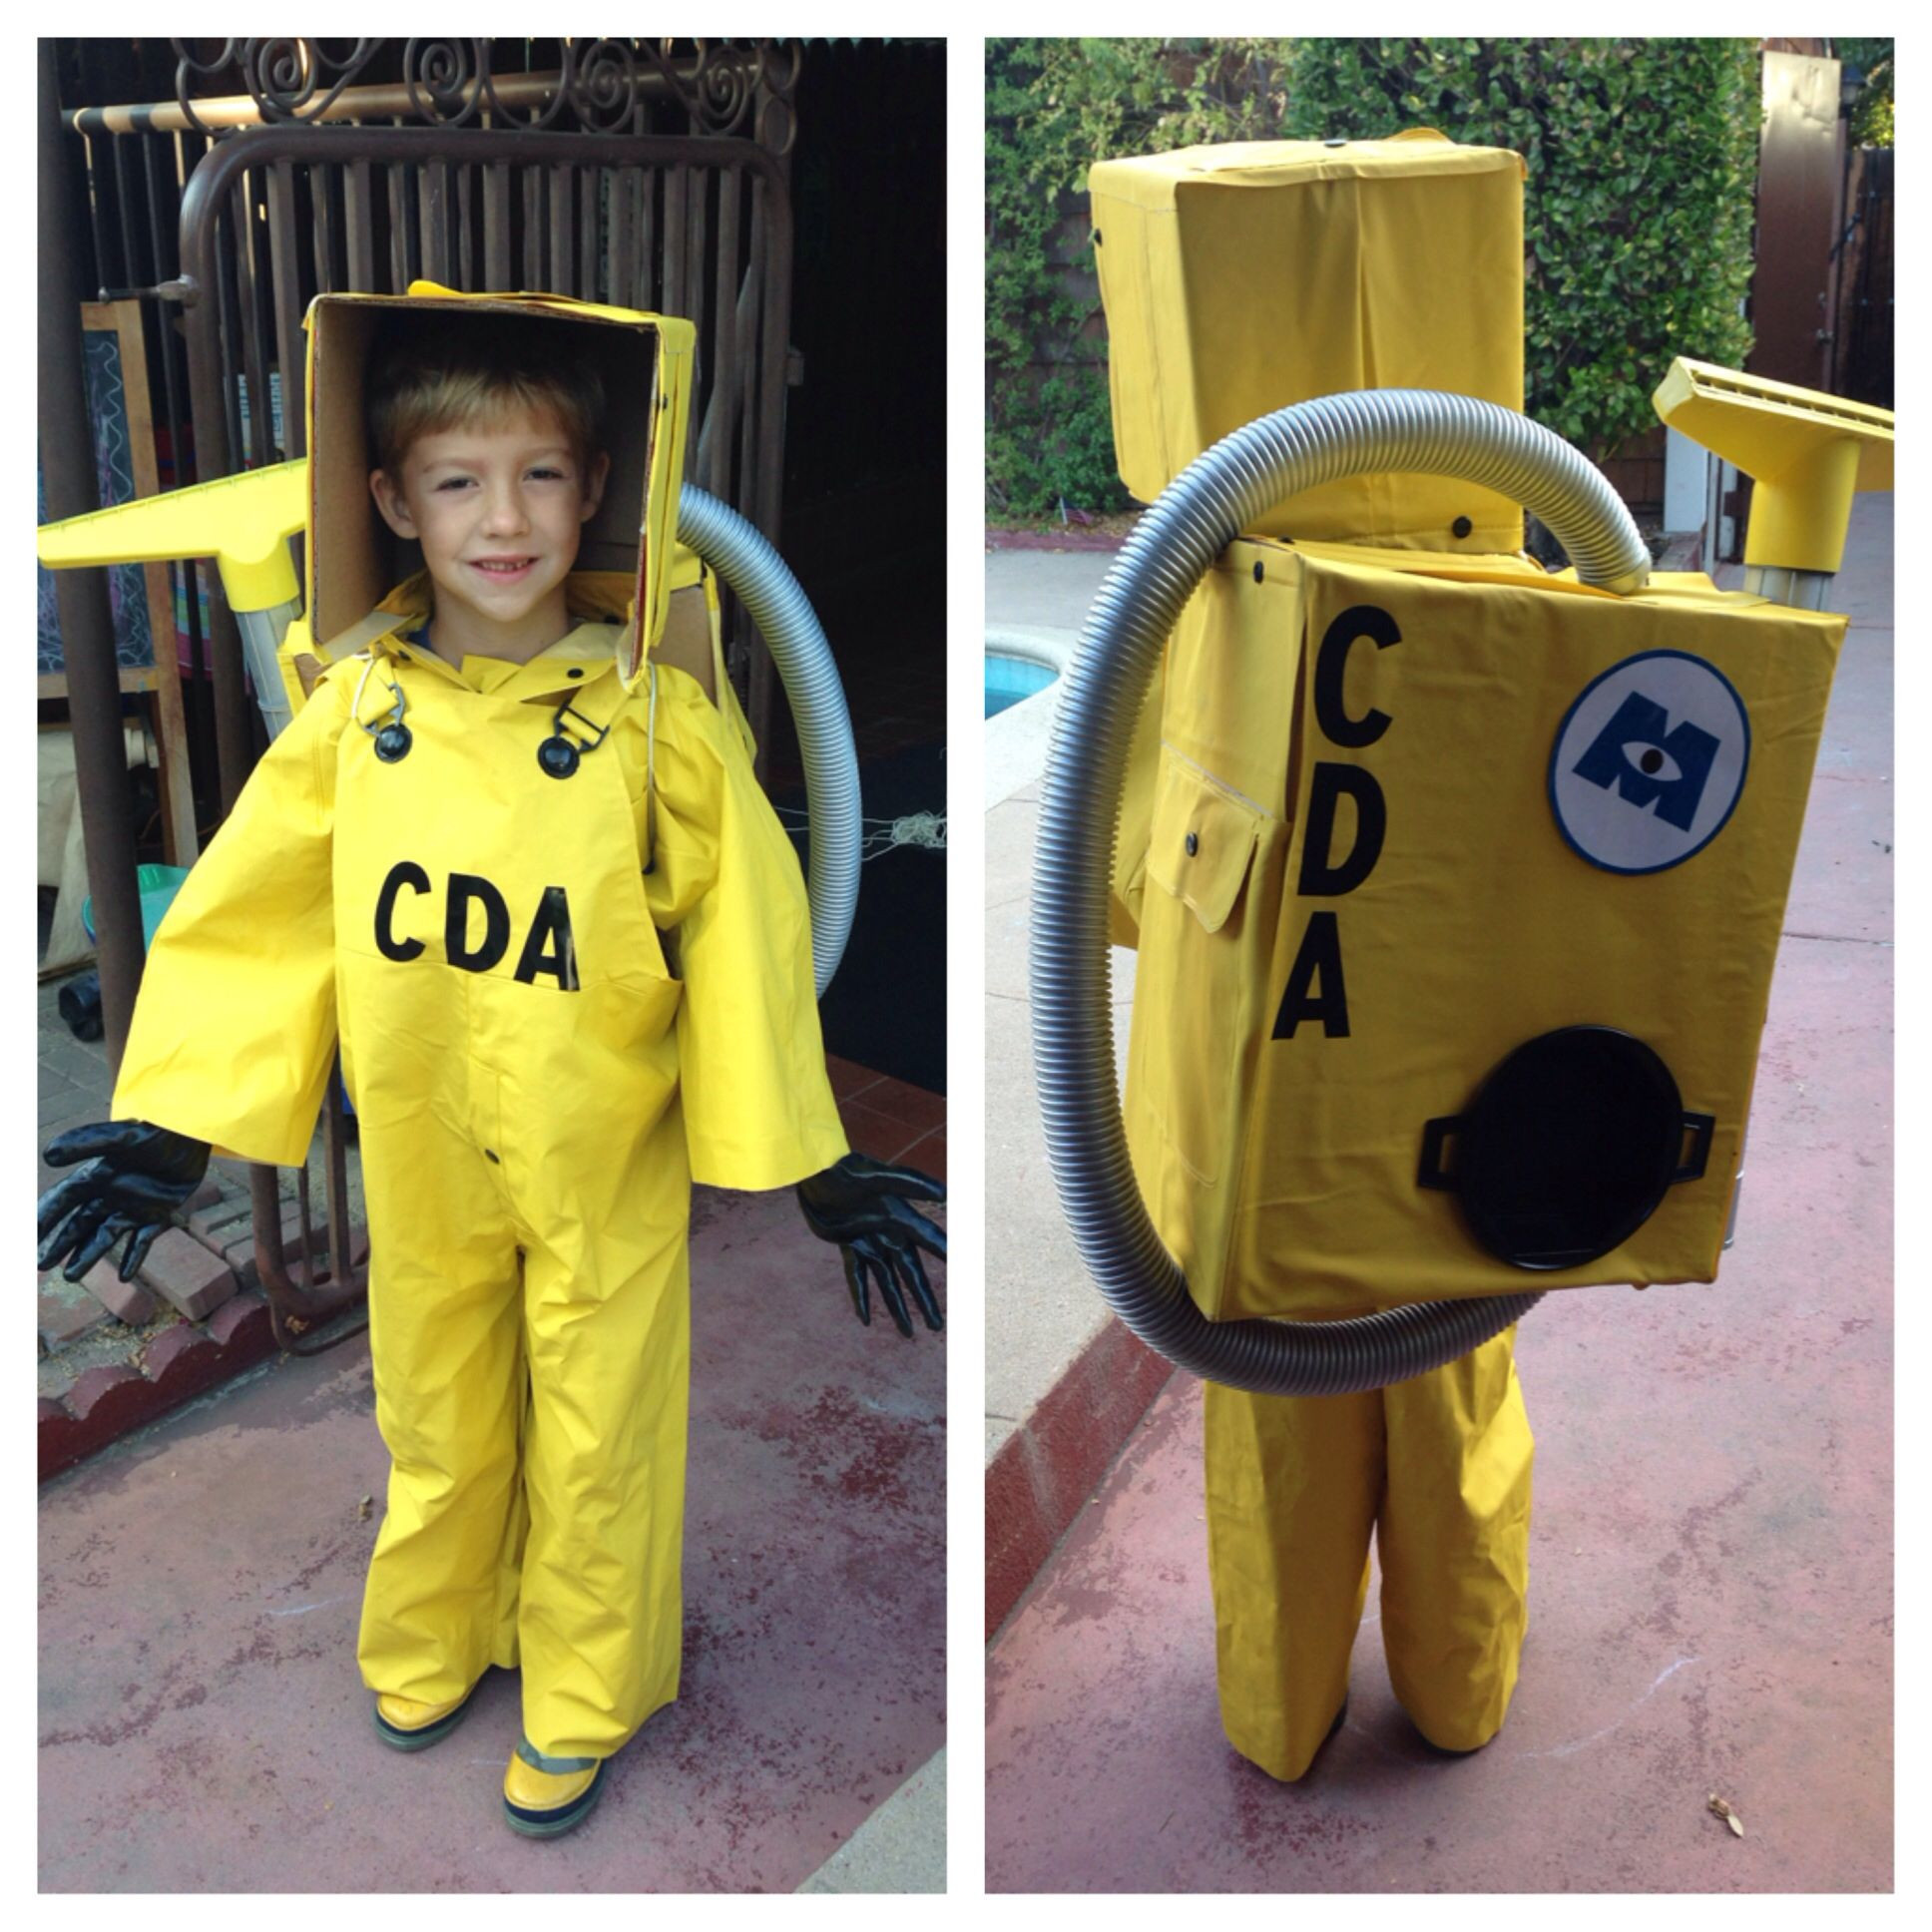 DIY Monsters Inc Costume
 Made a CDA costume Monsters inc for my oldest son My